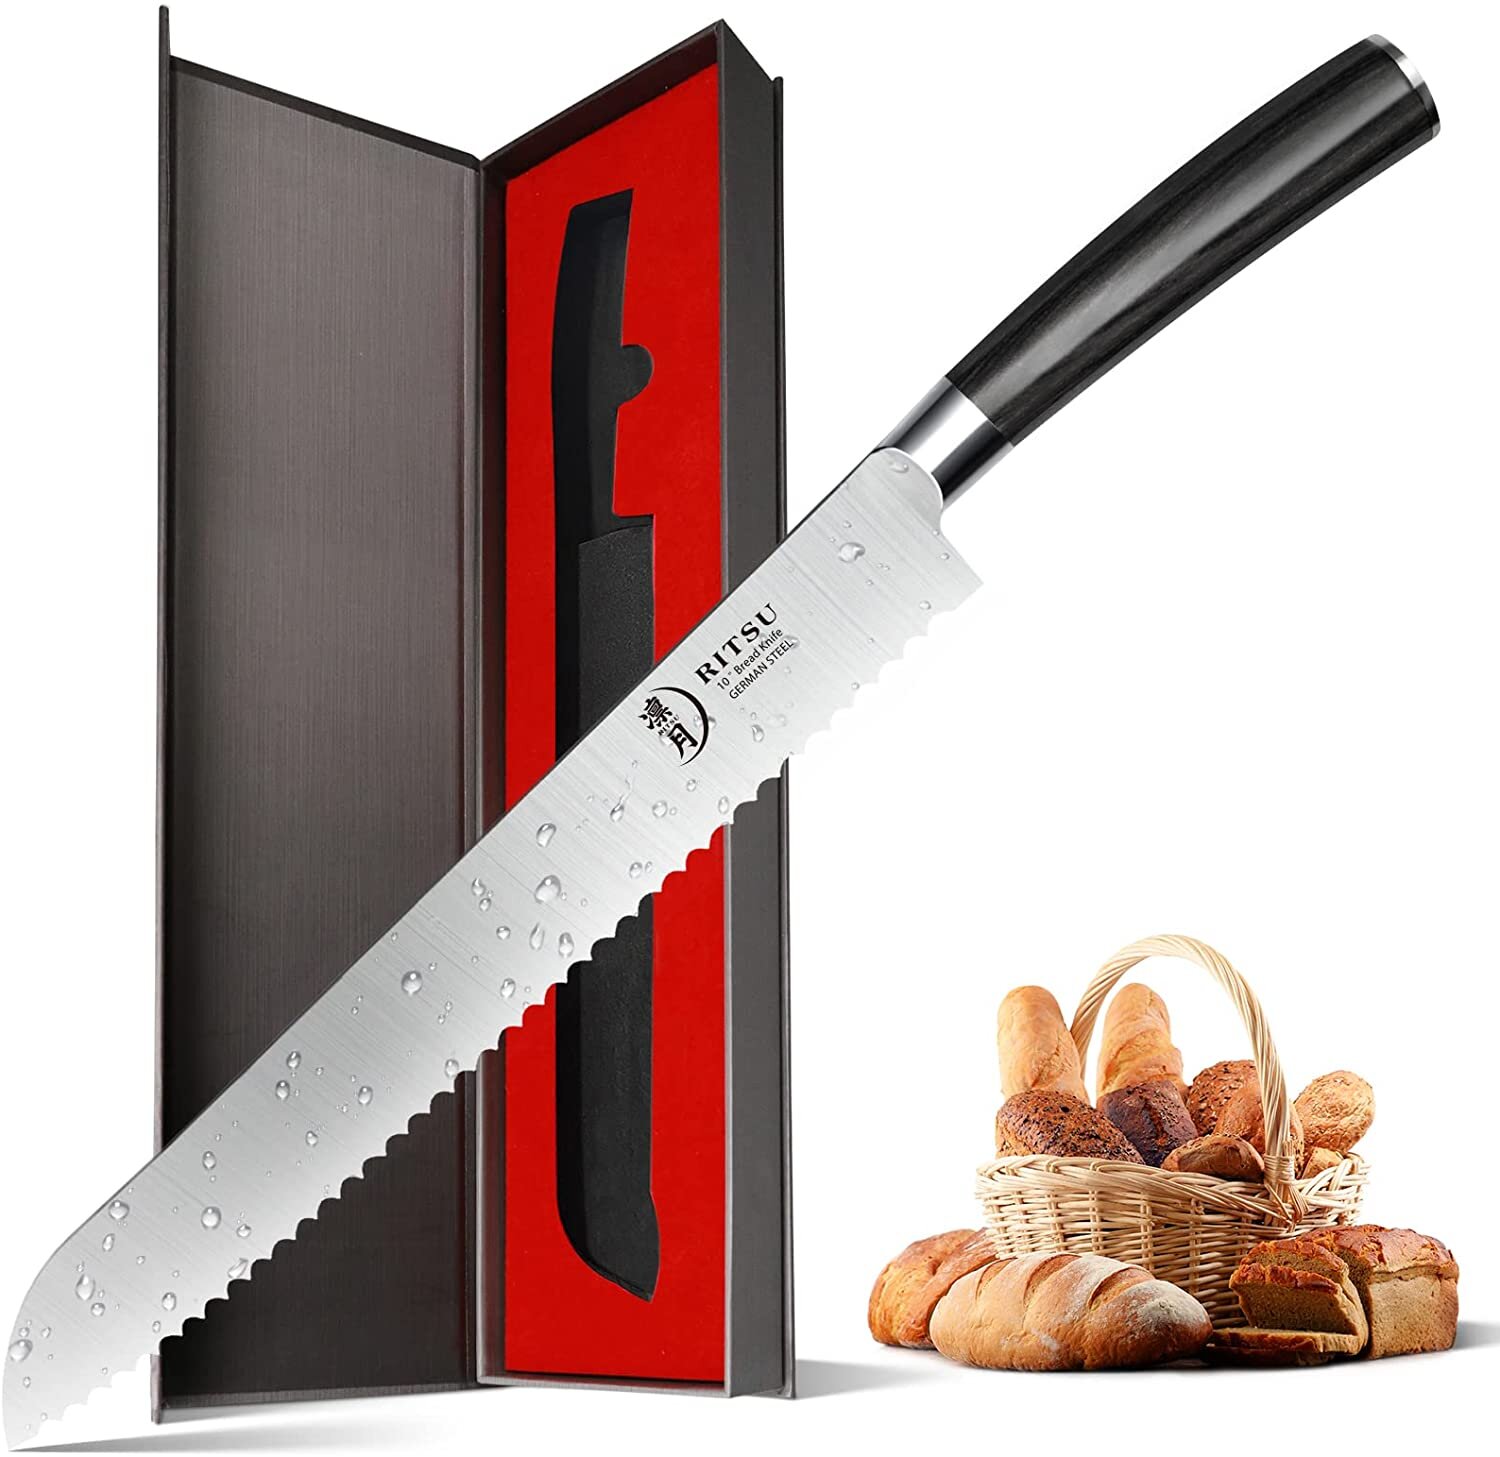 Cook N Home 10-In. High-Carbon Steel Full Tang Wavy Serrated Edge Slicer Bread Knife with Ergonomic Handle, Black